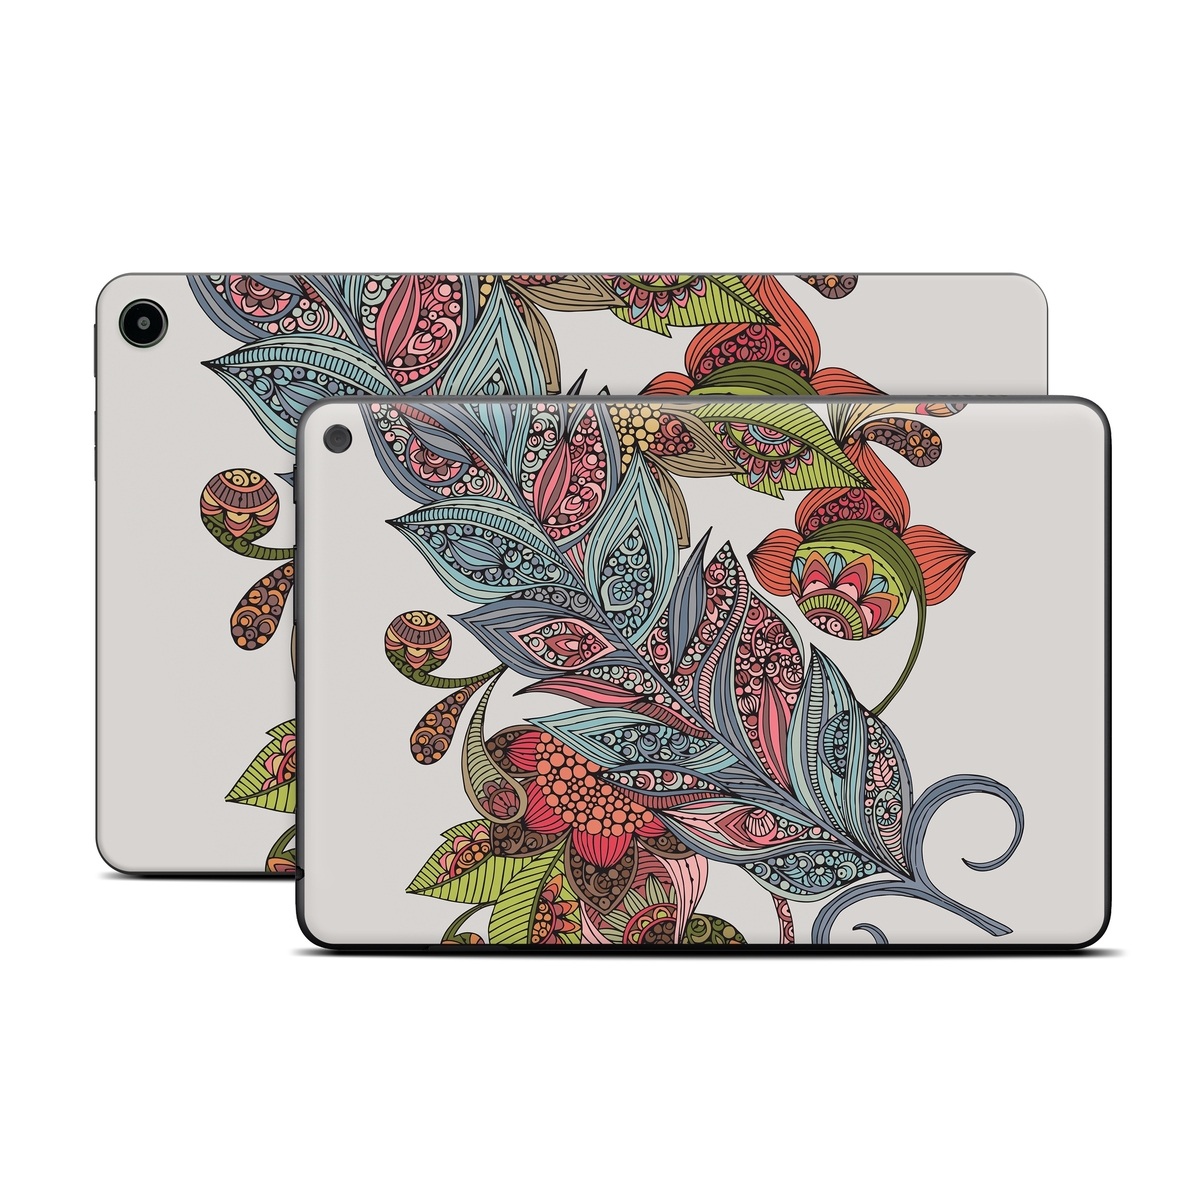 Amazon Fire Tablet Series Skin Skin design of Botany, Plant, Leaf, Pattern, Flower, Illustration, Design, Motif, Protea family, Flowering plant, with green, blue, pink, red, yellow, orange, gray, brown colors